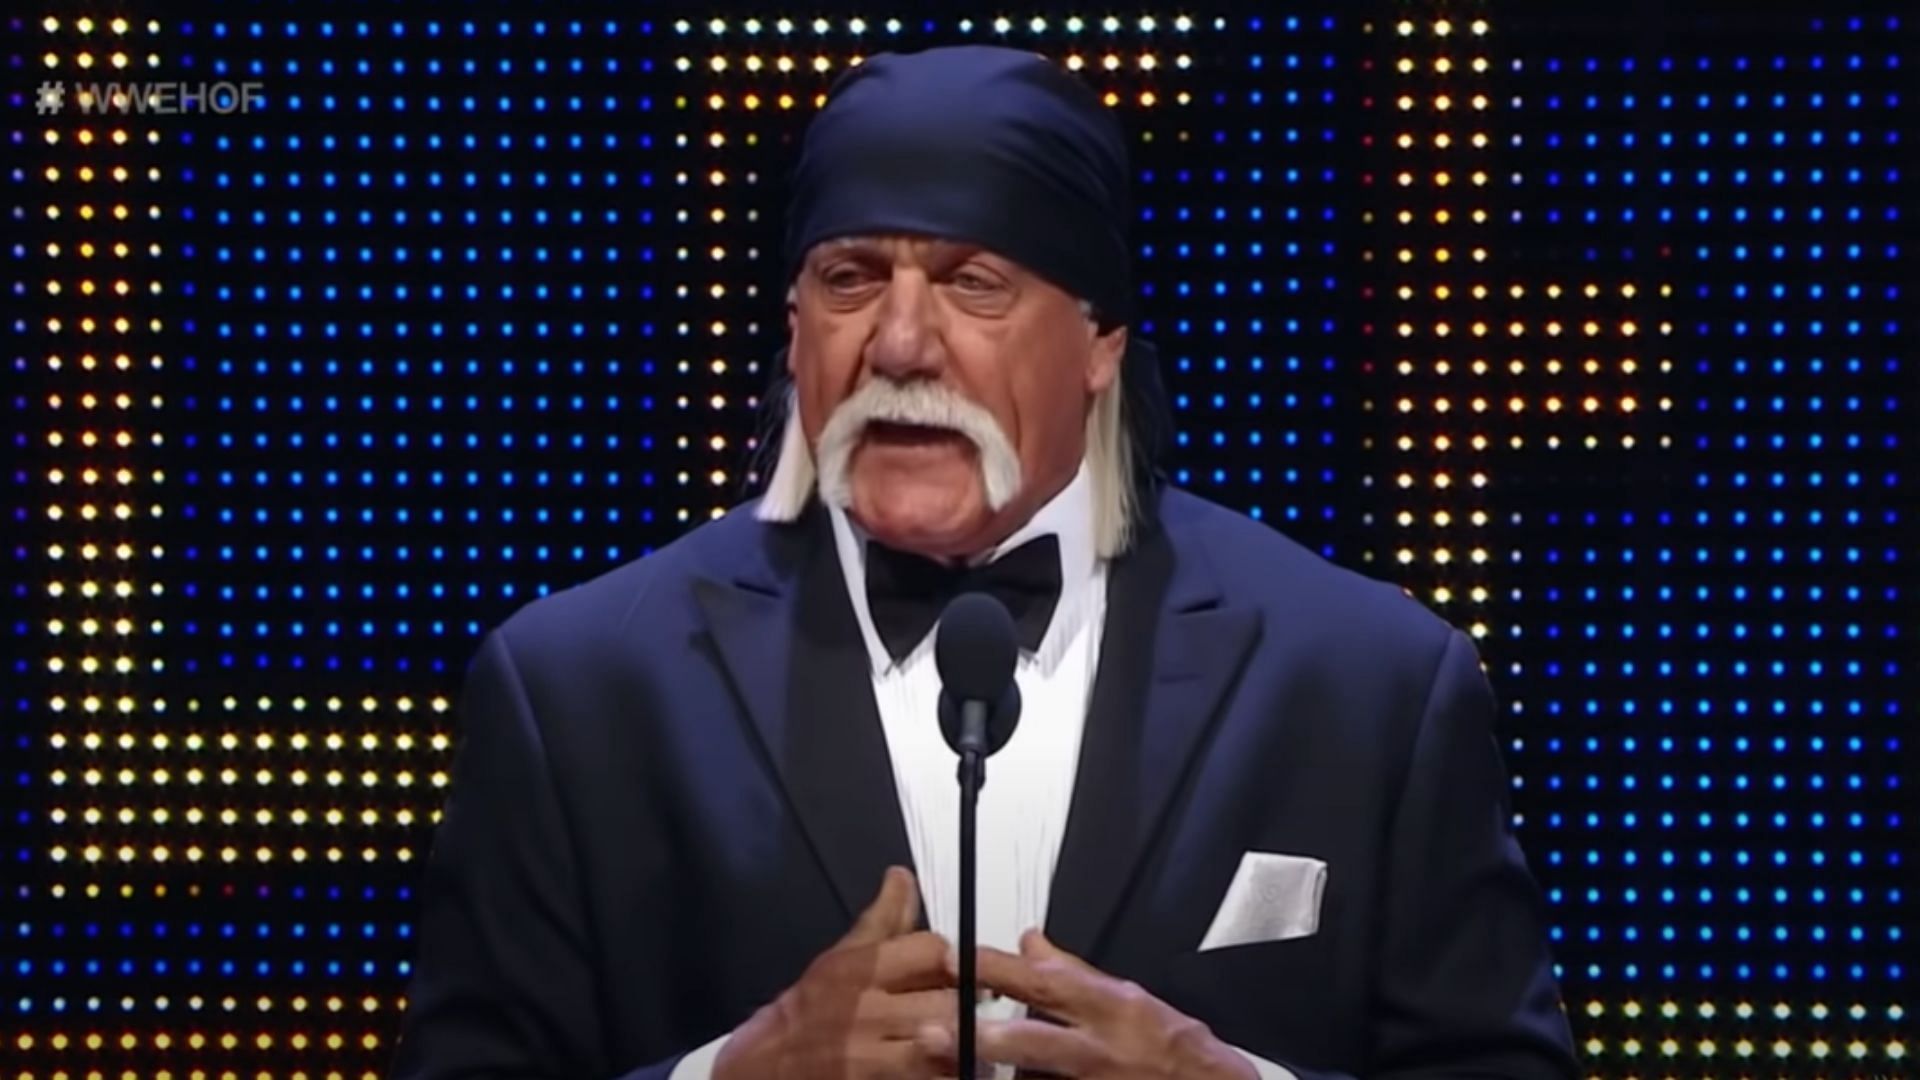 Hulk Hogan has been inducted into the WWE Hall of Fame twice